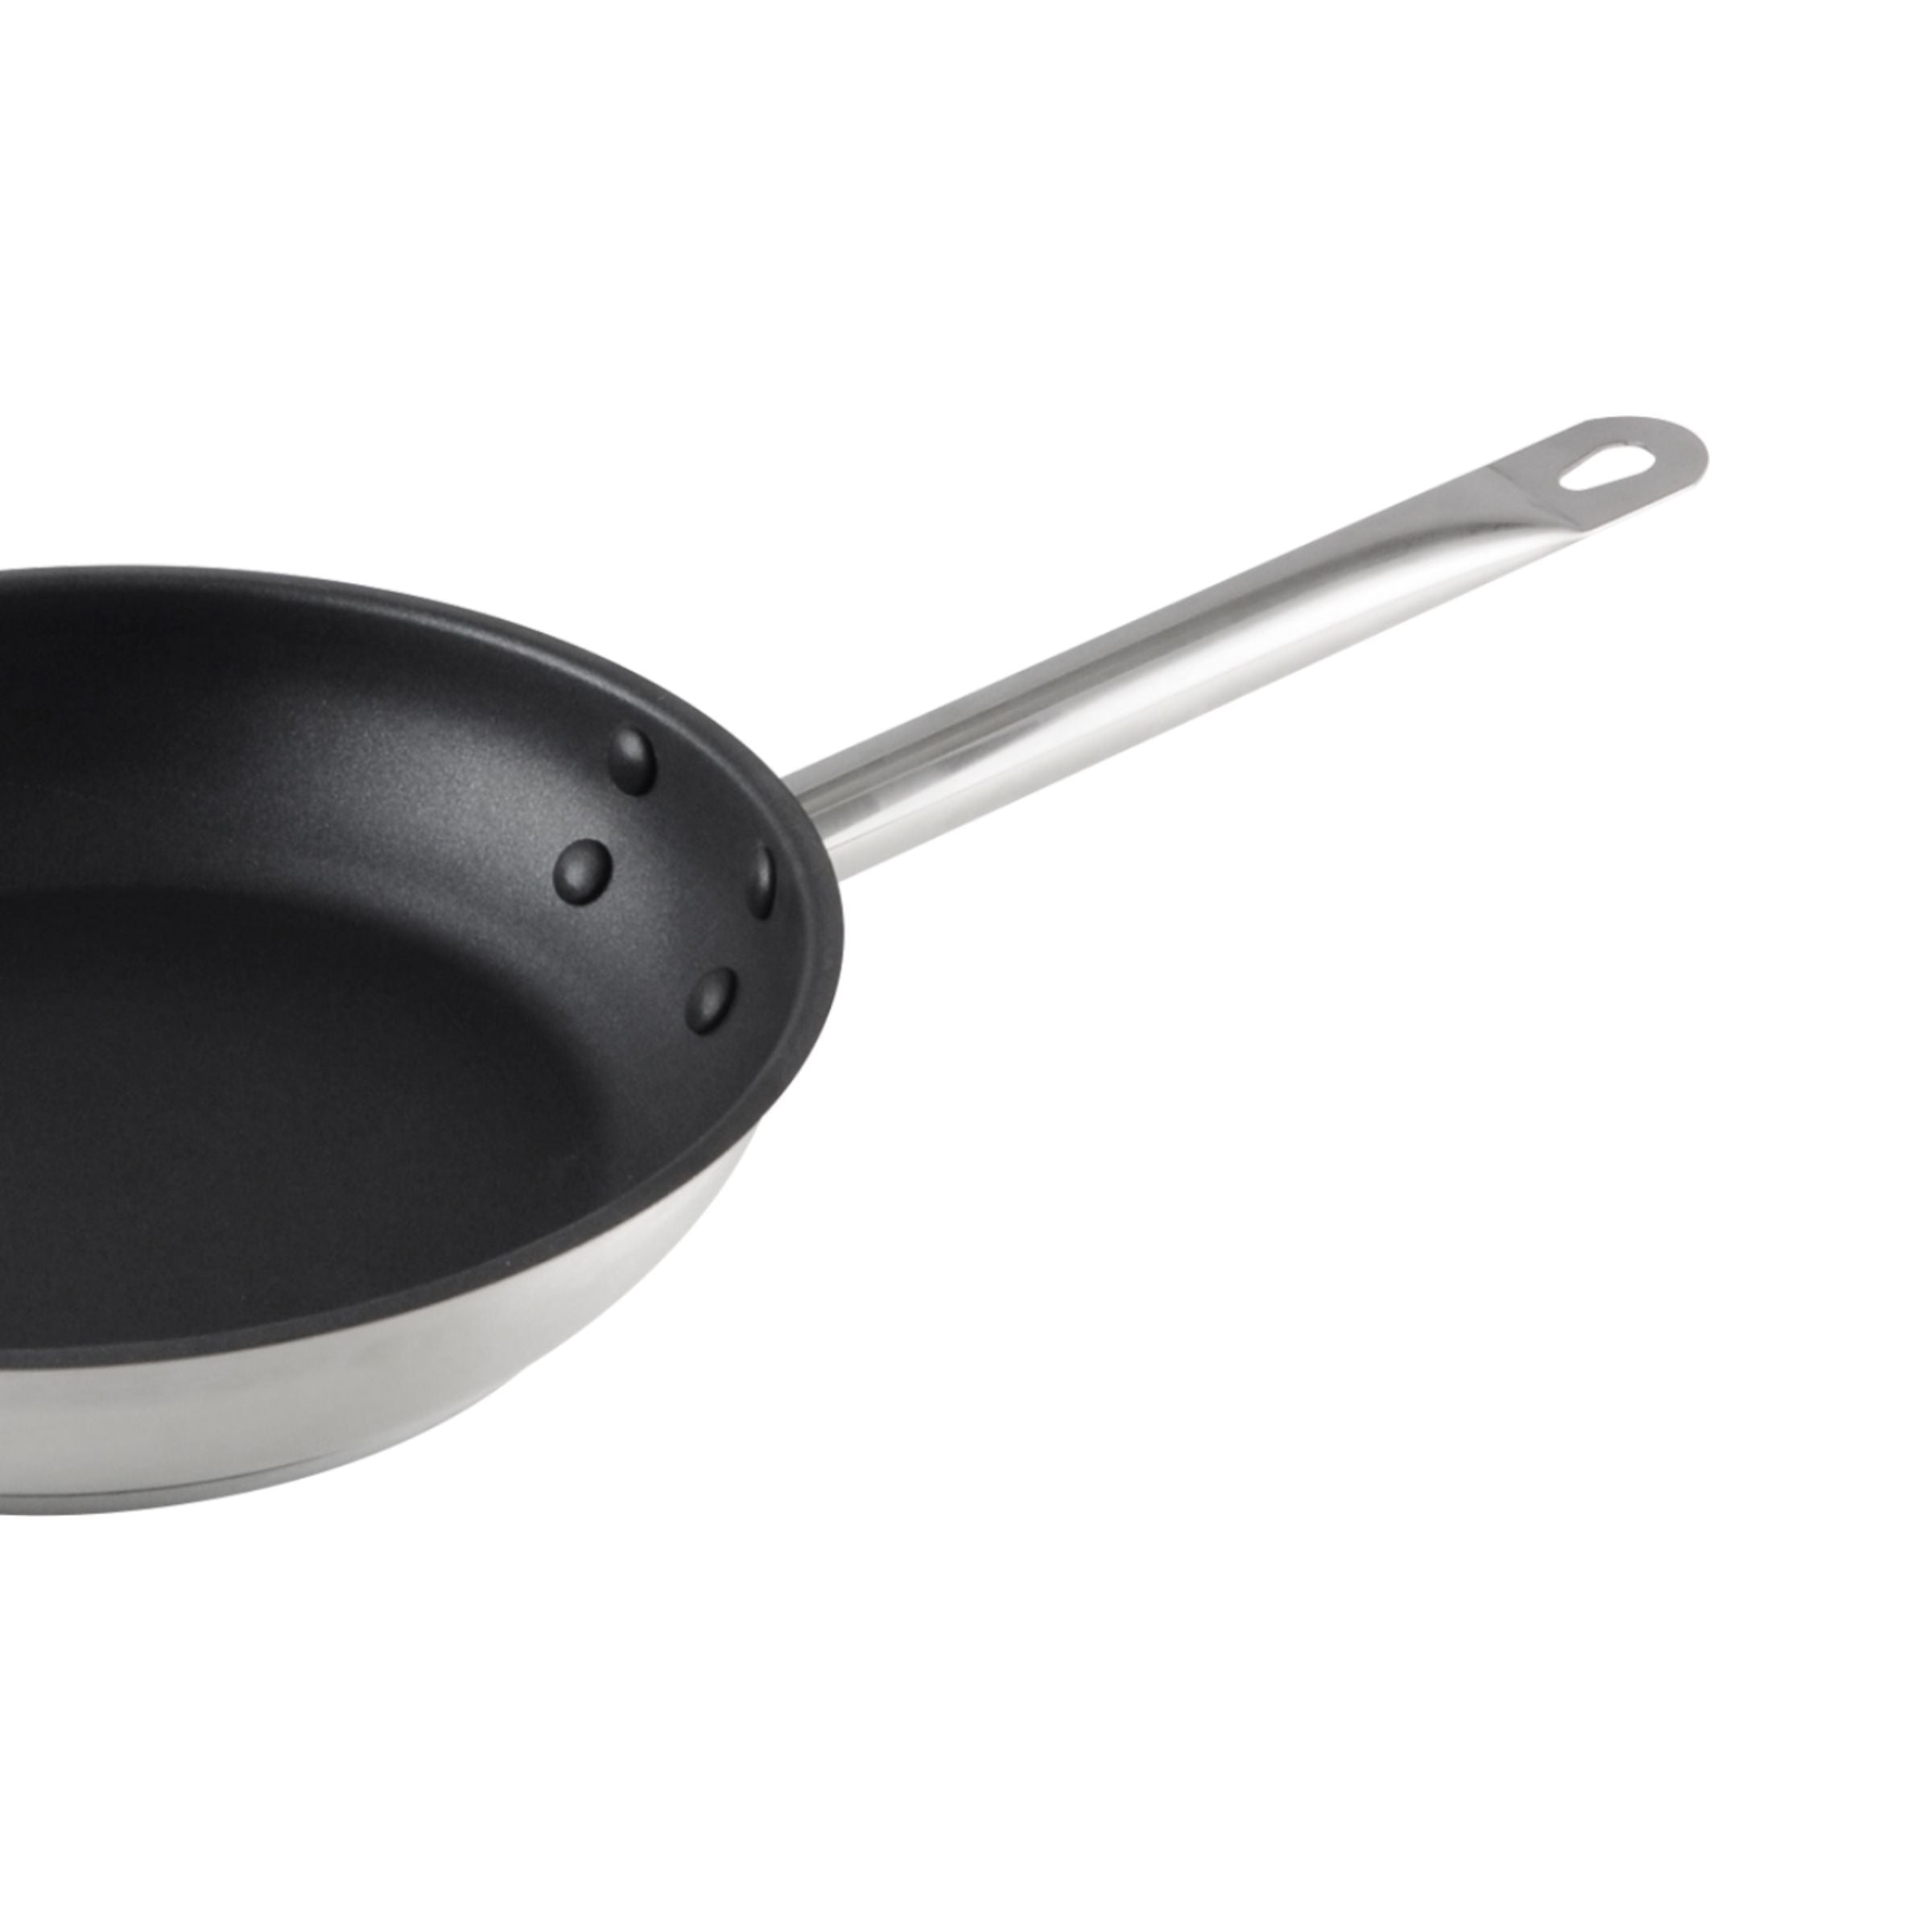 Thunder Group Stainless Steel Non-Stick Fry Pan Quantum II